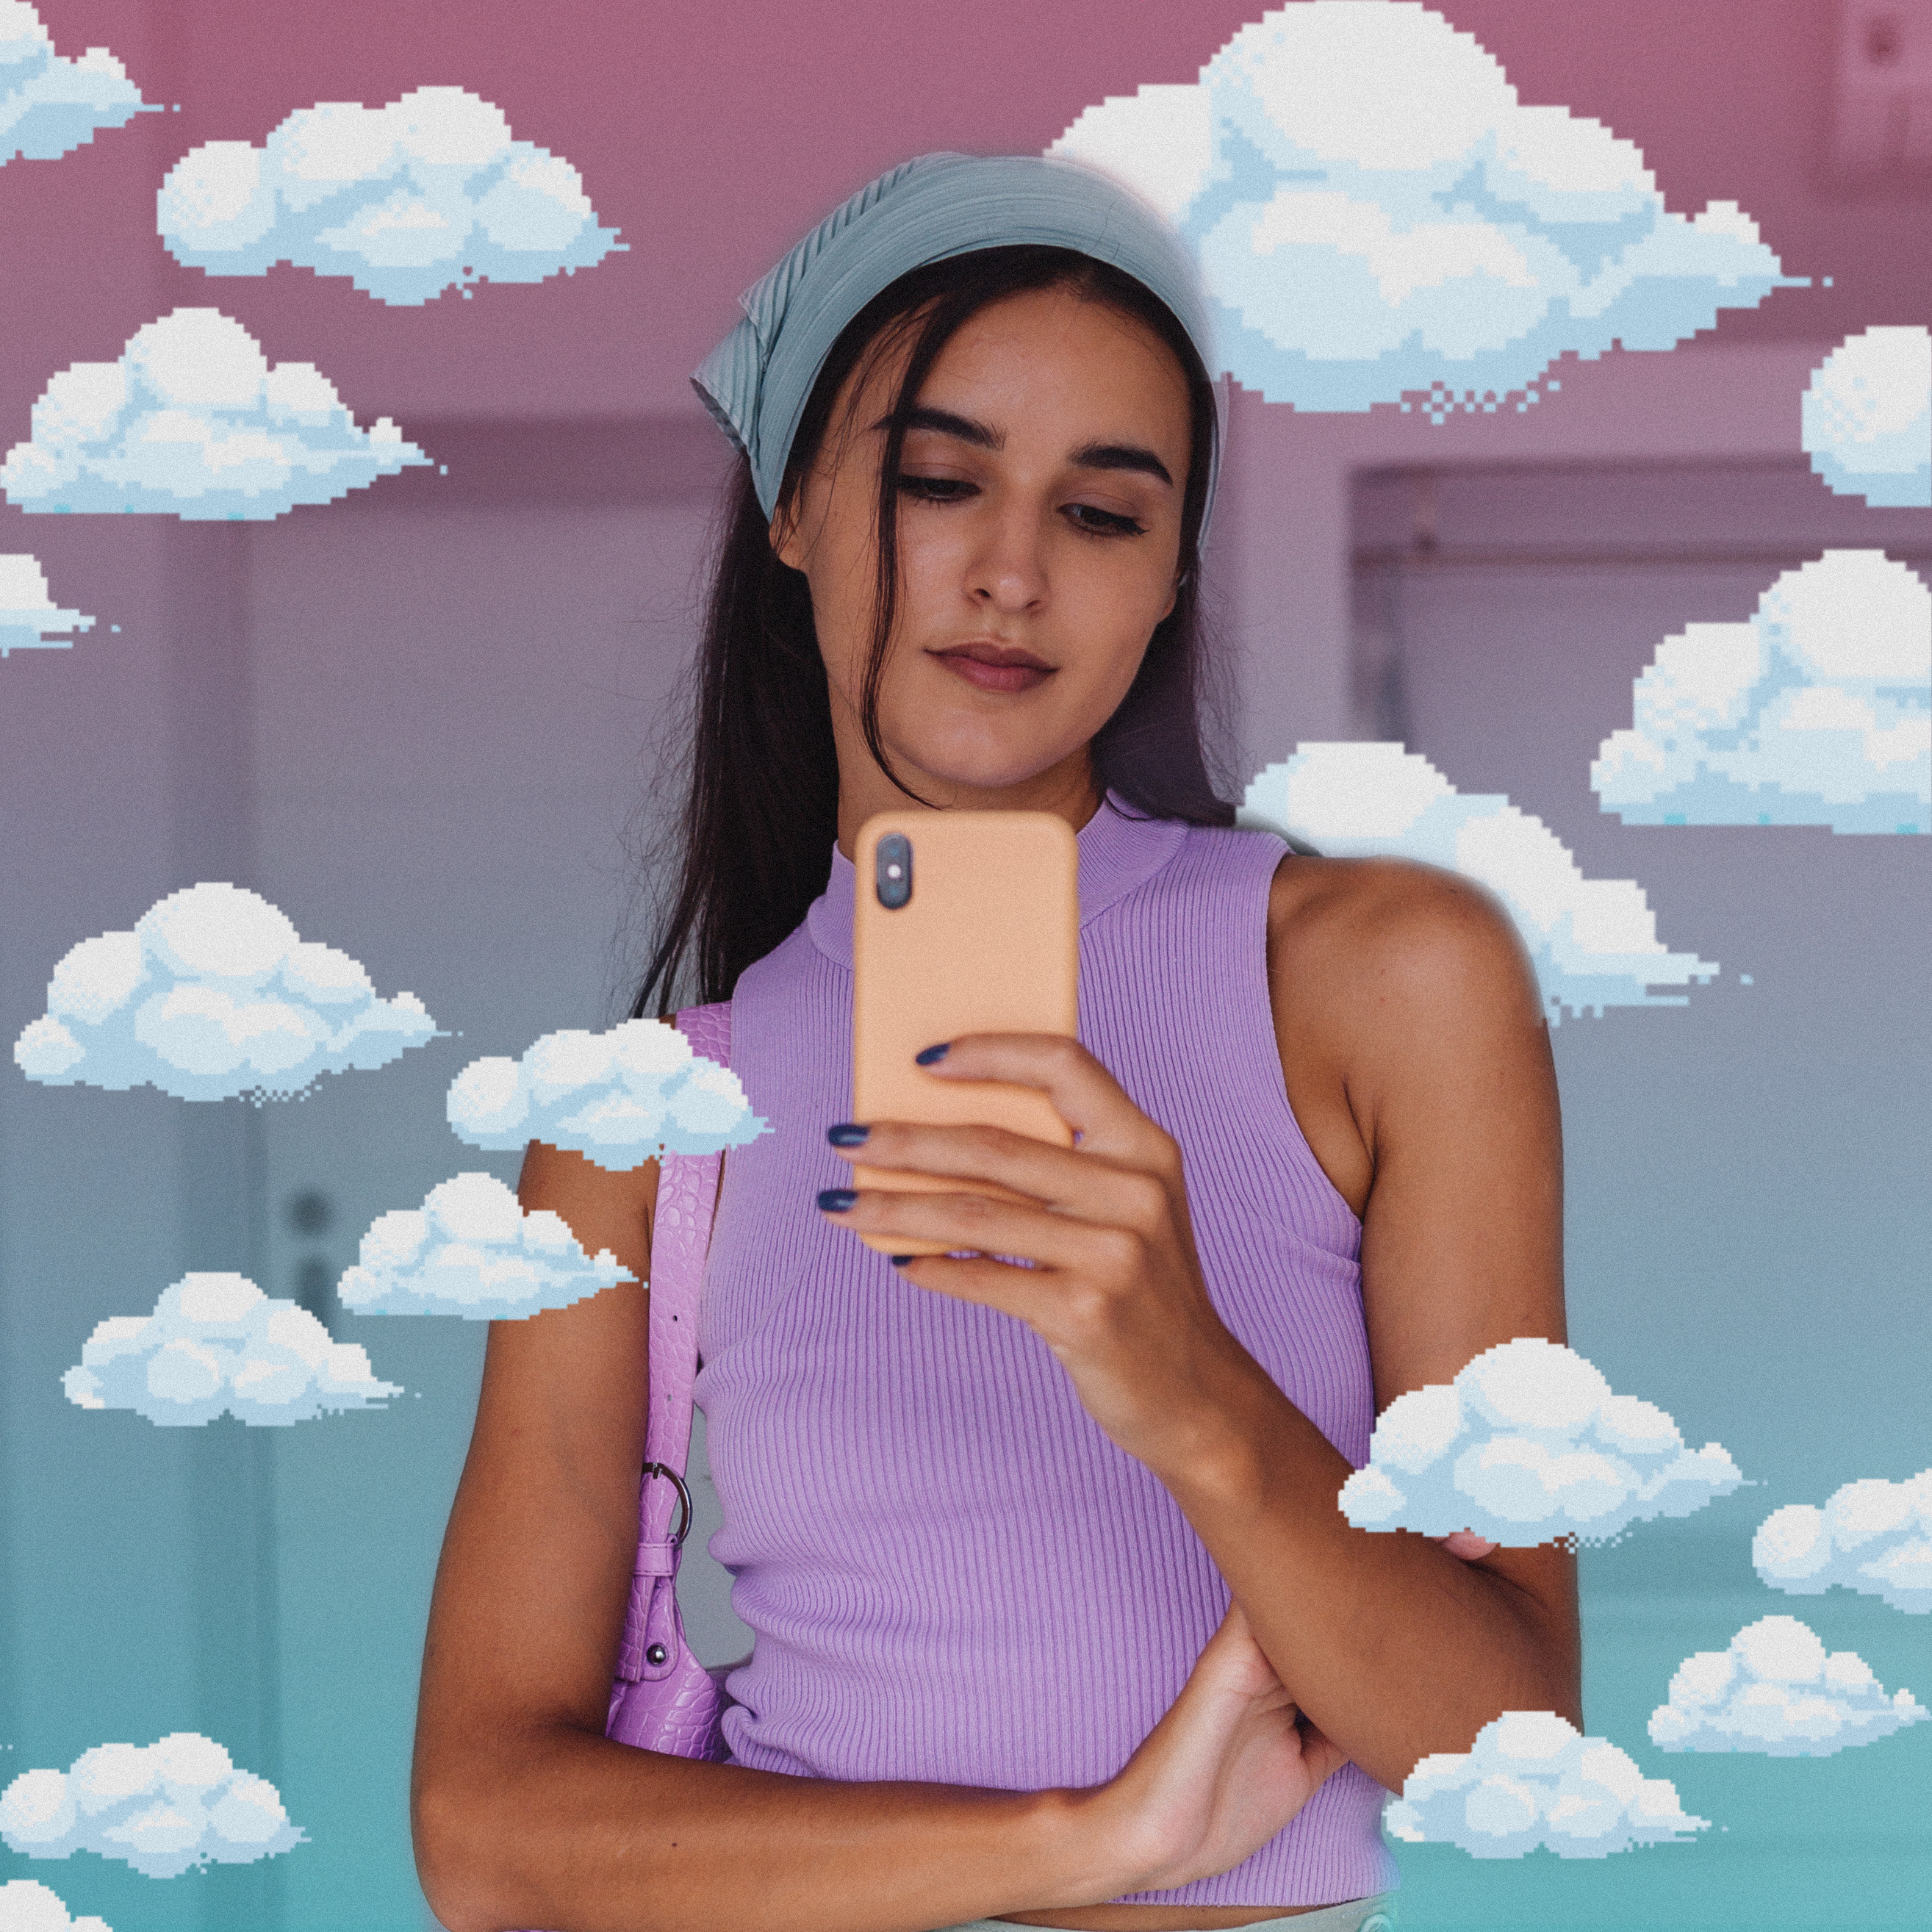 Here's an edit idea for you ☁️✨– Create a pixel cloud mirror selfie with Stickers 👀 #mirror #mirrorselfie #gradient #pixel #pixelclouds #freetoedit 